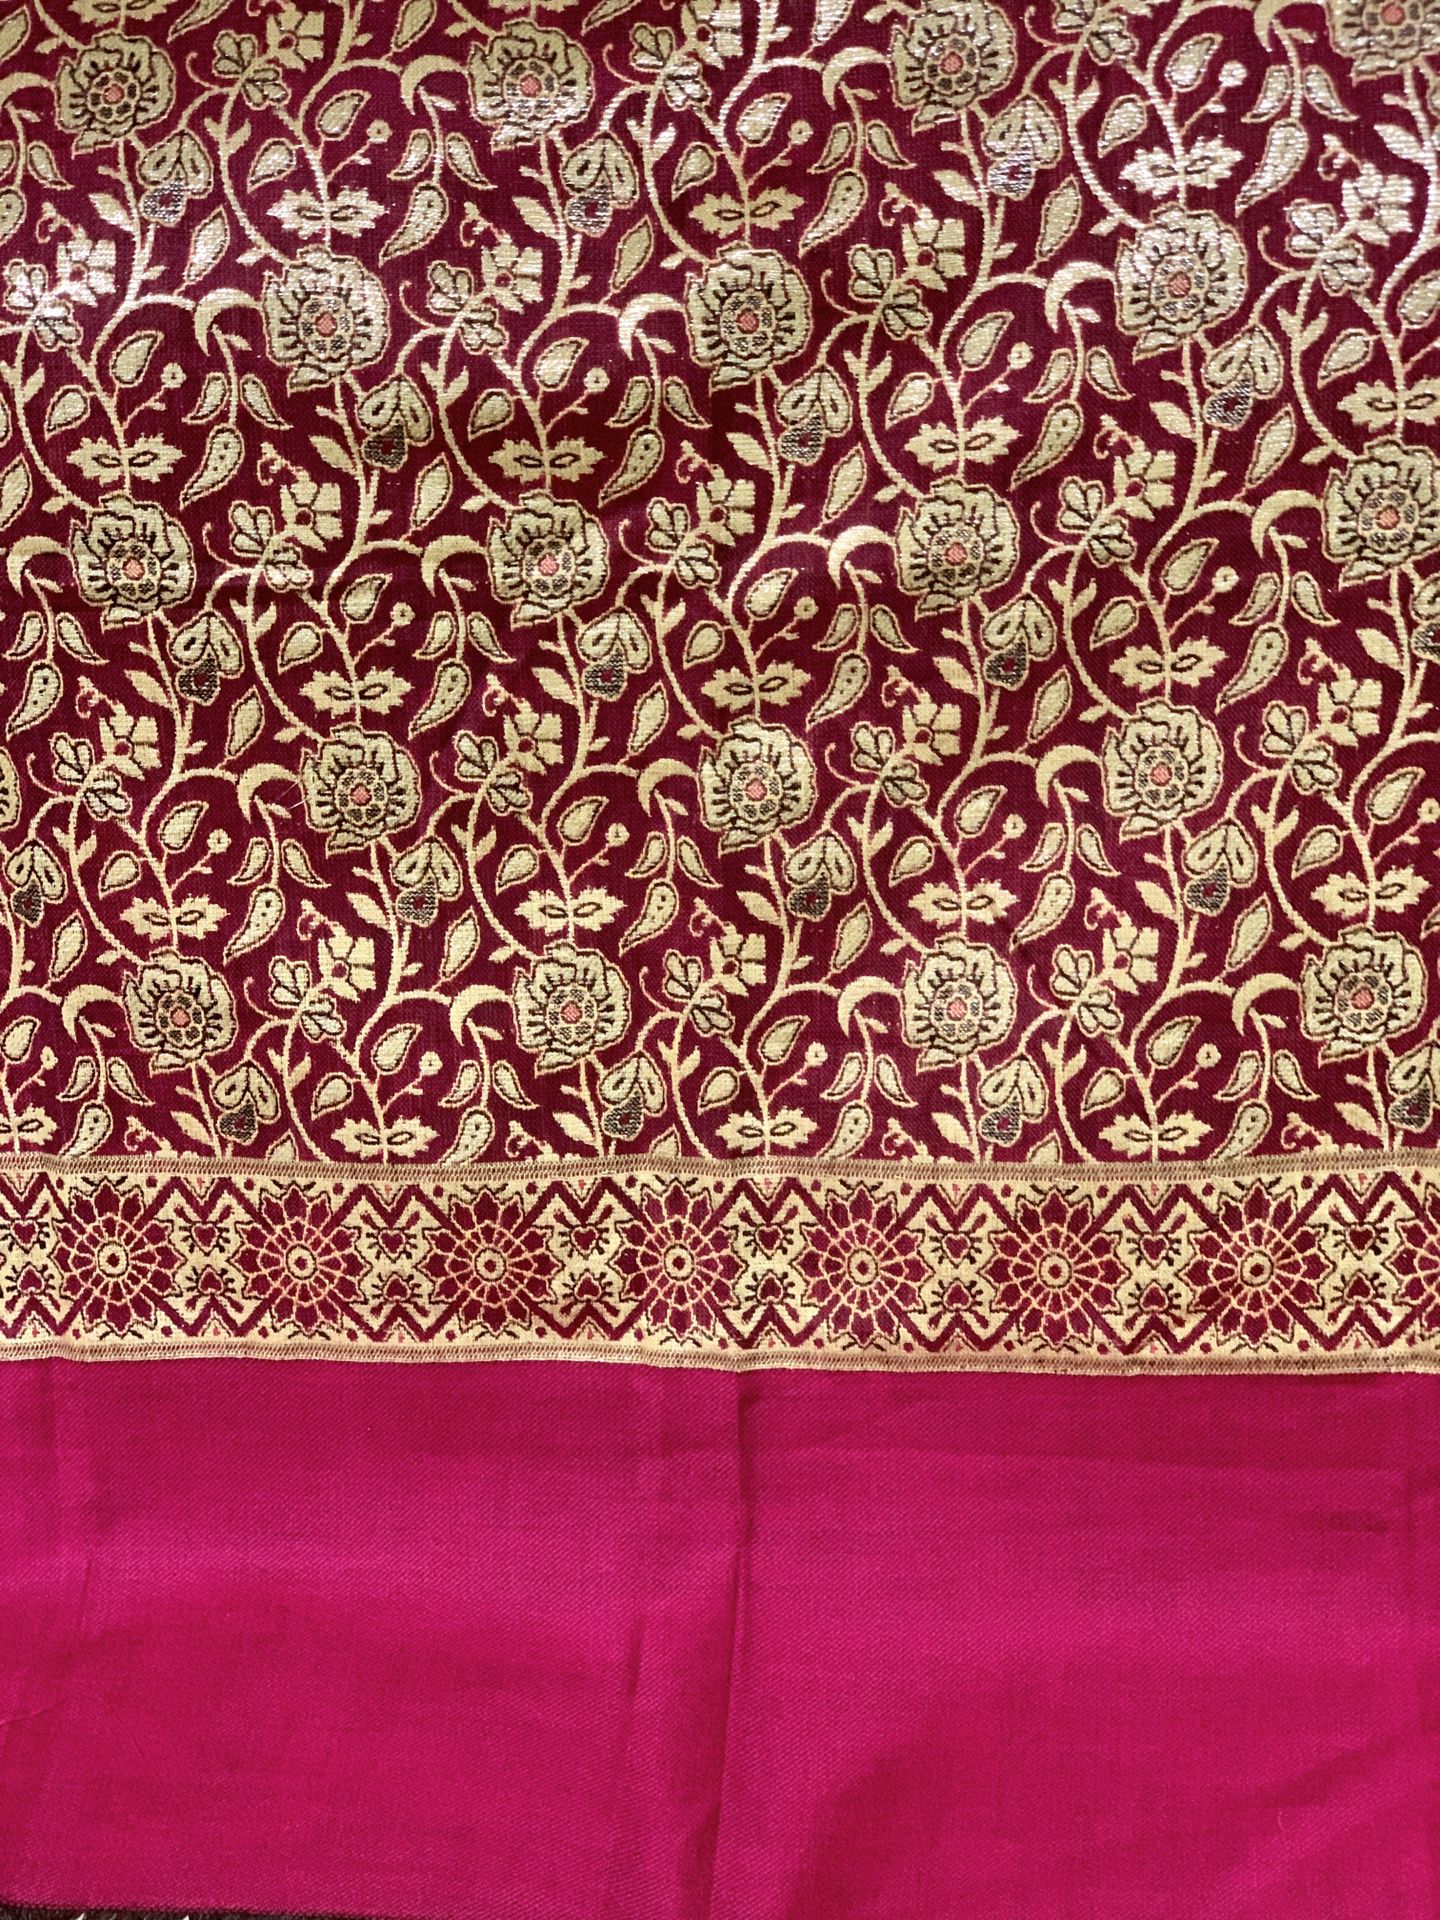 Silk shawl/ scarf - Heavily embroidered